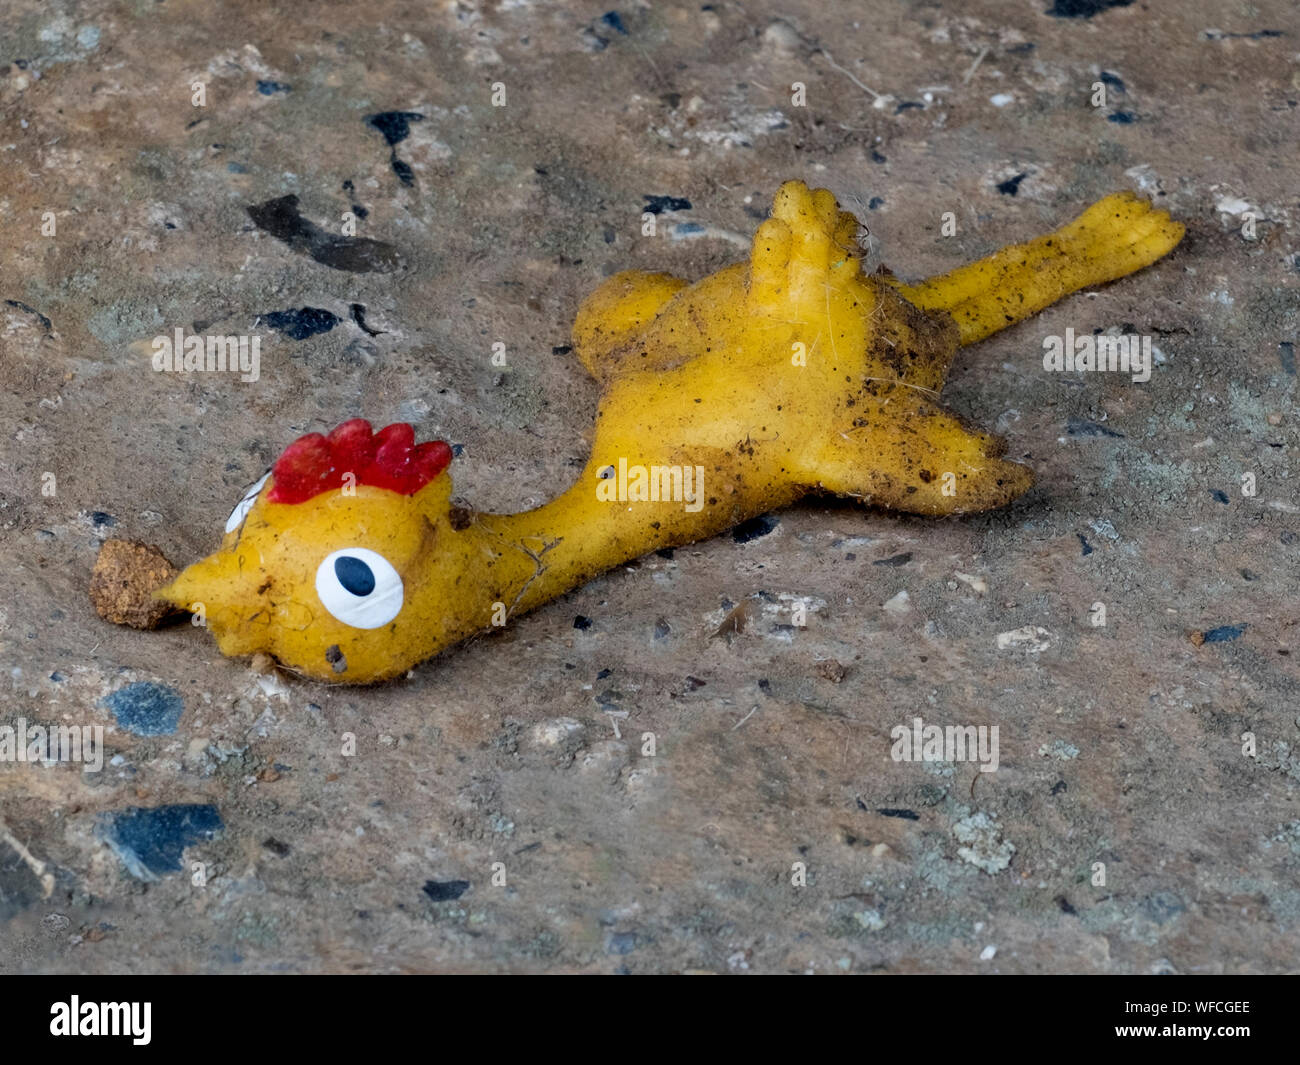 Discarded or lost, but funny small toy rubber chicken spotted underneath a seat on the clifftop. Stock Photo